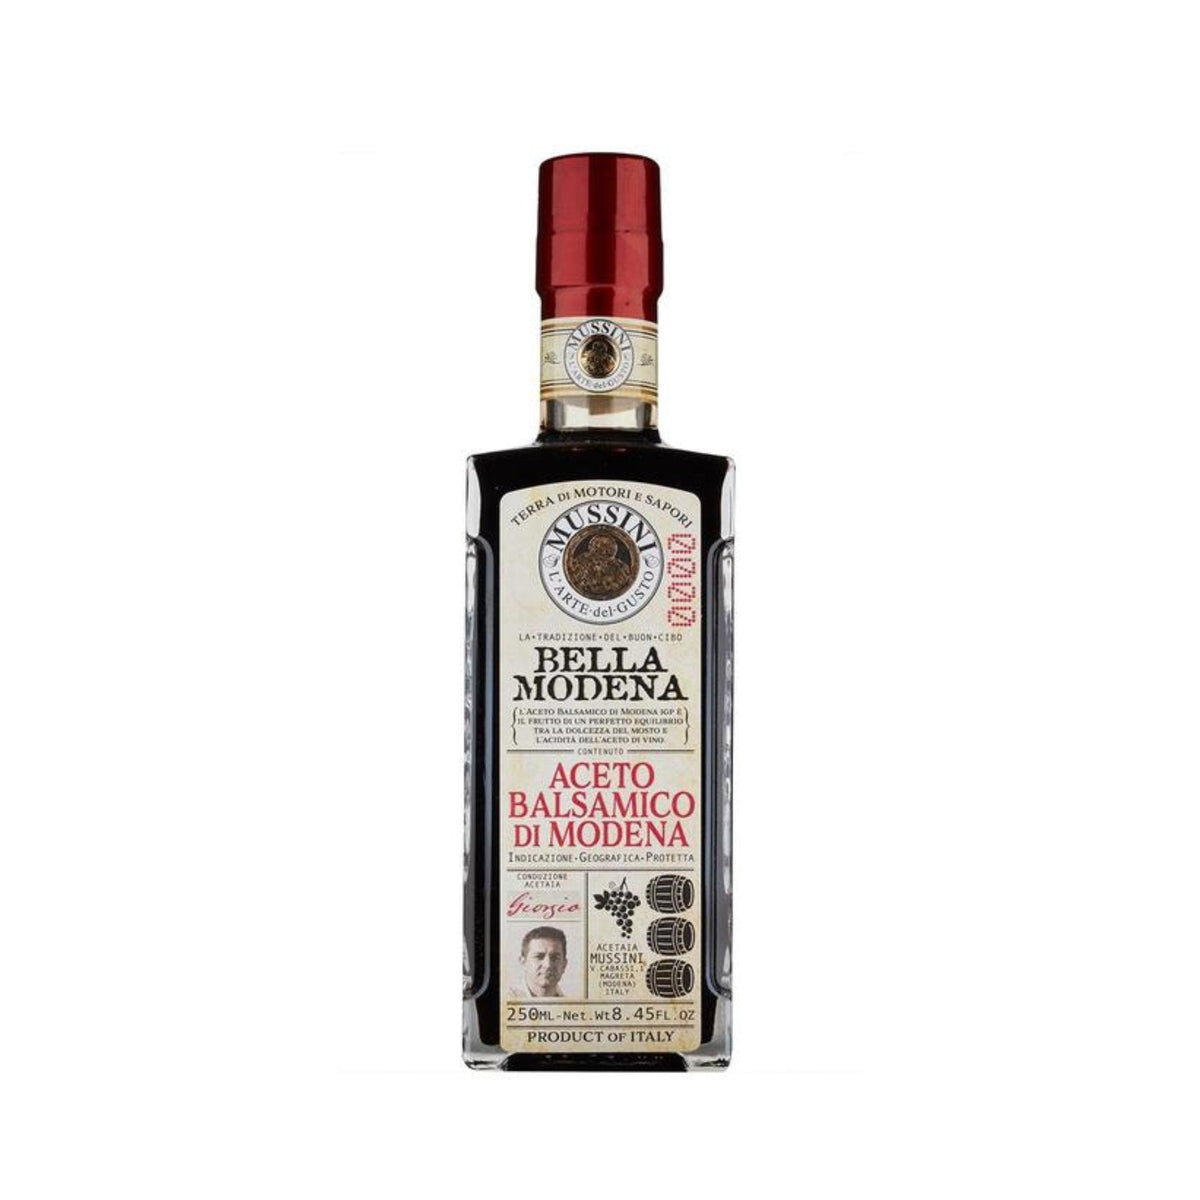 Mussini IGP Balsamic Vinegar of Modena Nuova Bella Modena 3 Coins 250ml  | Imported and distributed in the UK by Just Gourmet Foods